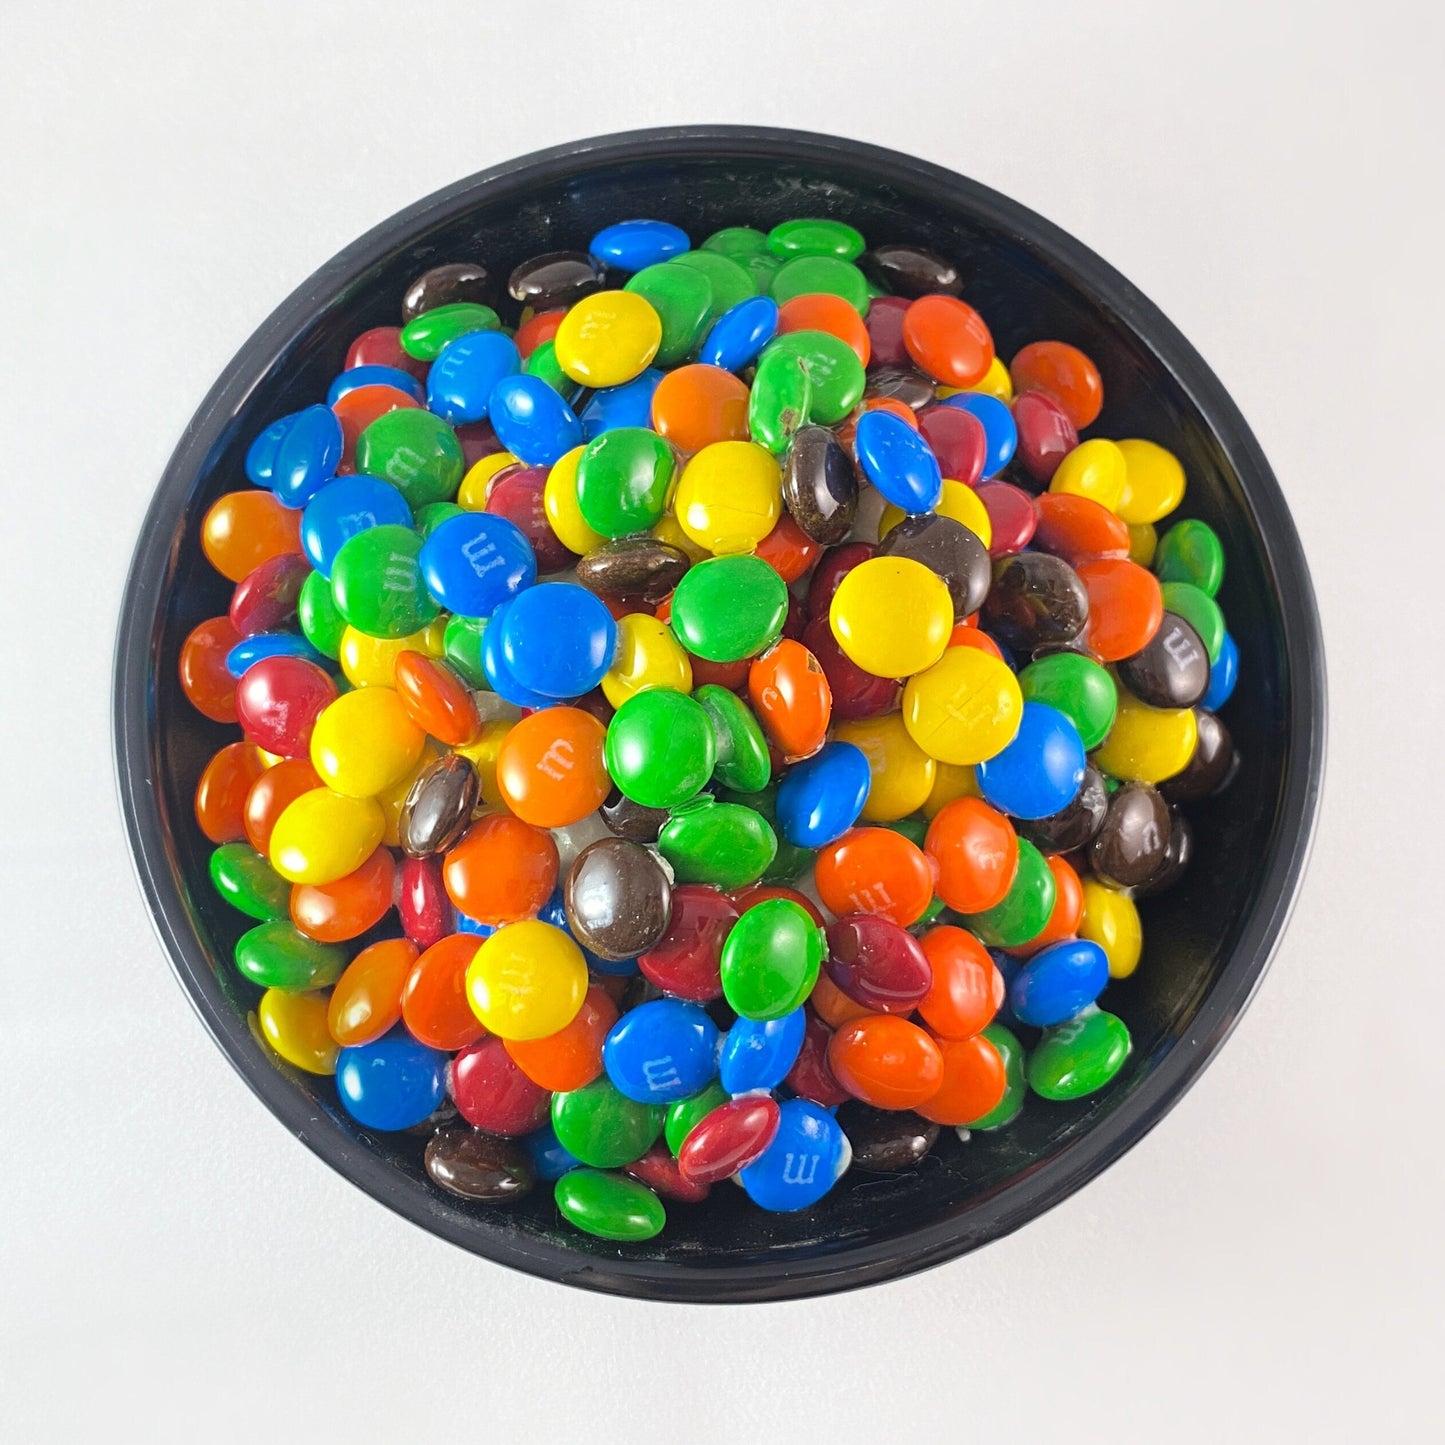 Bowl of M&Ms, Venetian Glass Decor - Handmade in Italy, Colorful Murano Glass